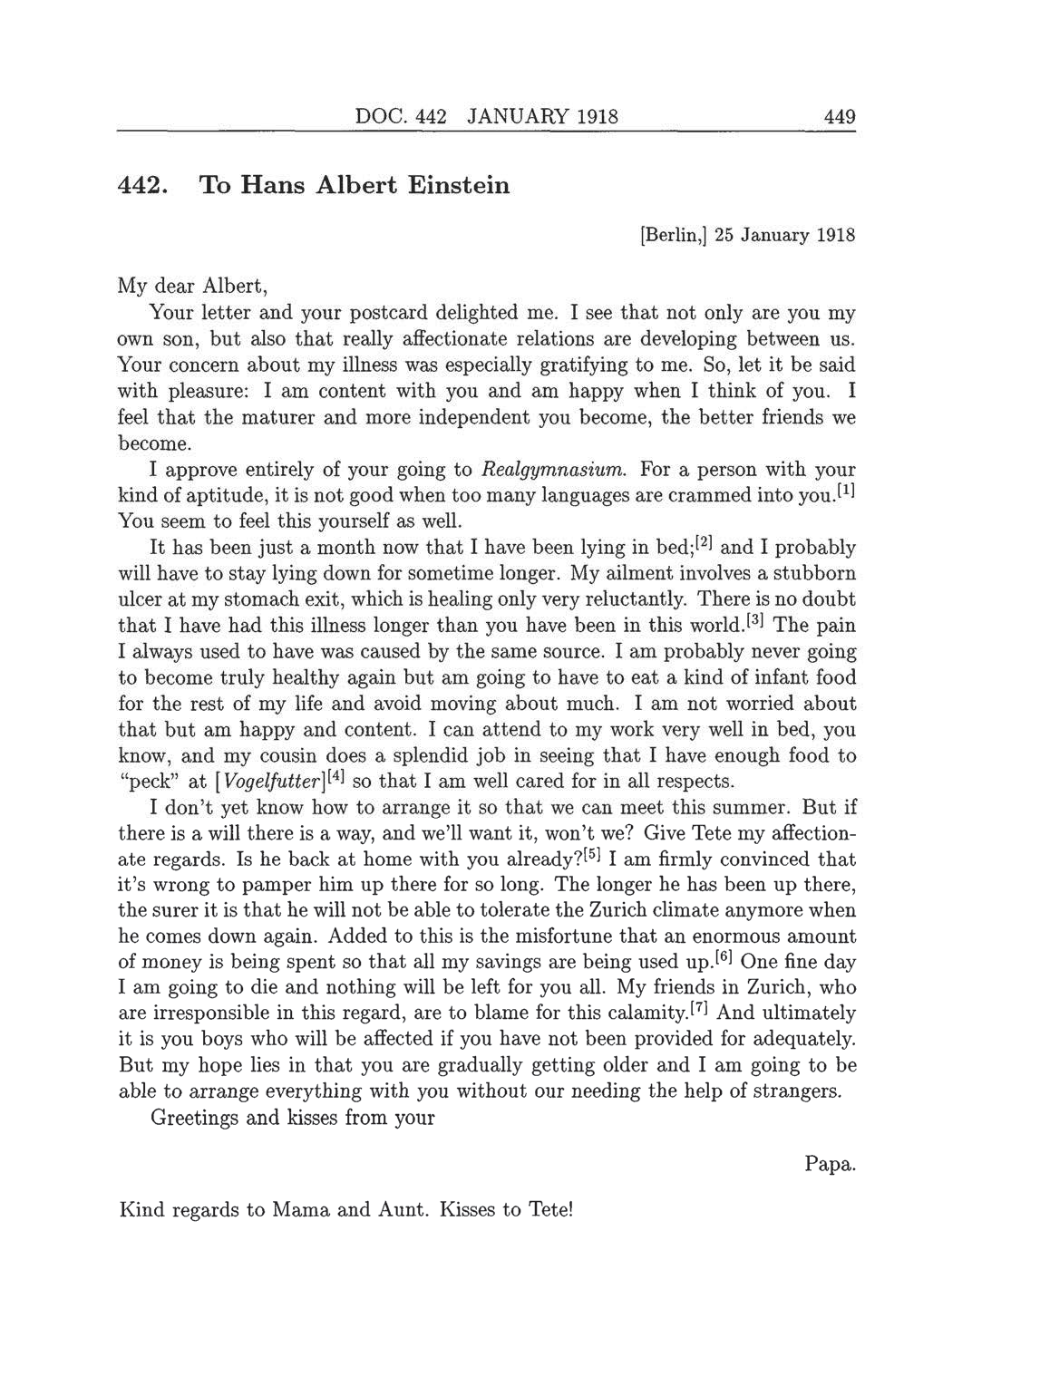 Volume 8: The Berlin Years: Correspondence, 1914-1918 (English translation supplement) page 449